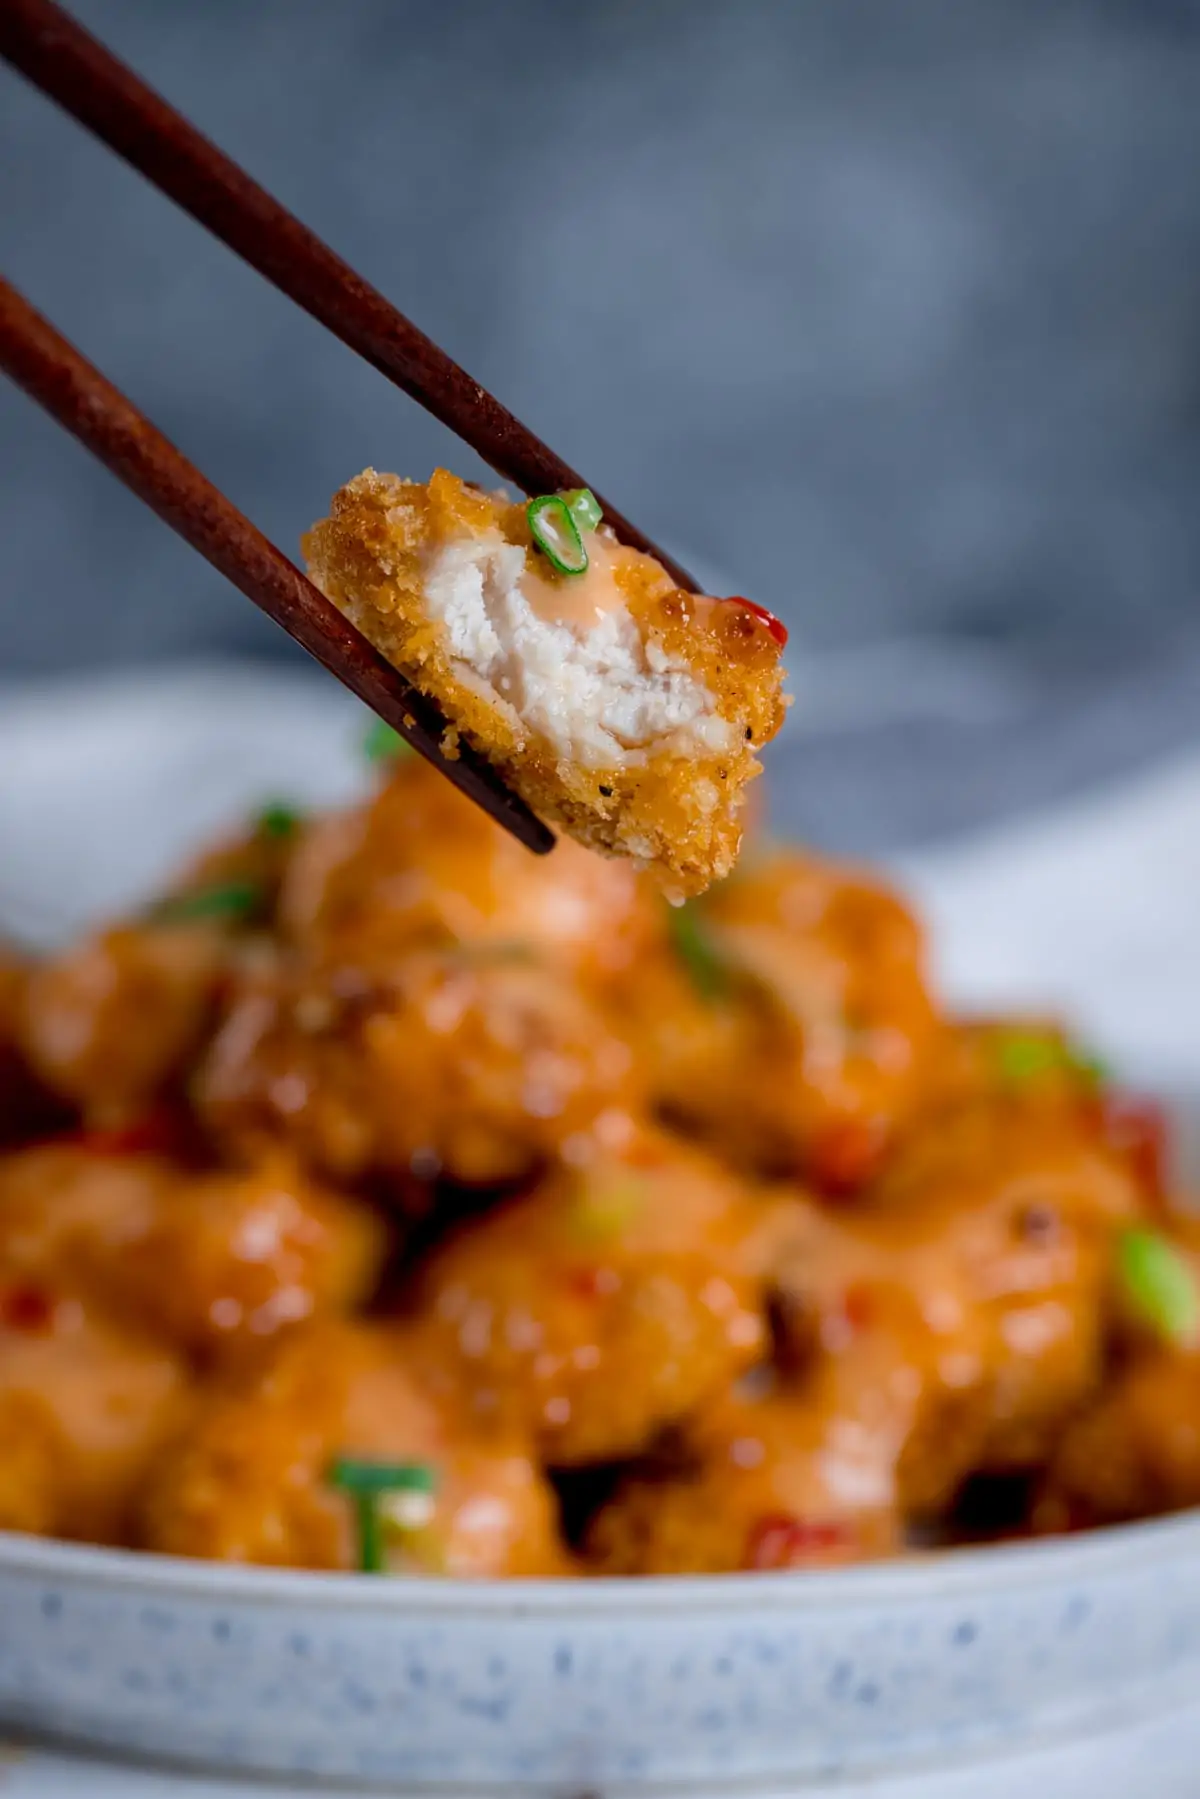 Piece of bang bang chicken with a bite out being held with a pair of chopsticks. Bowl of bang bang chicken in the background.